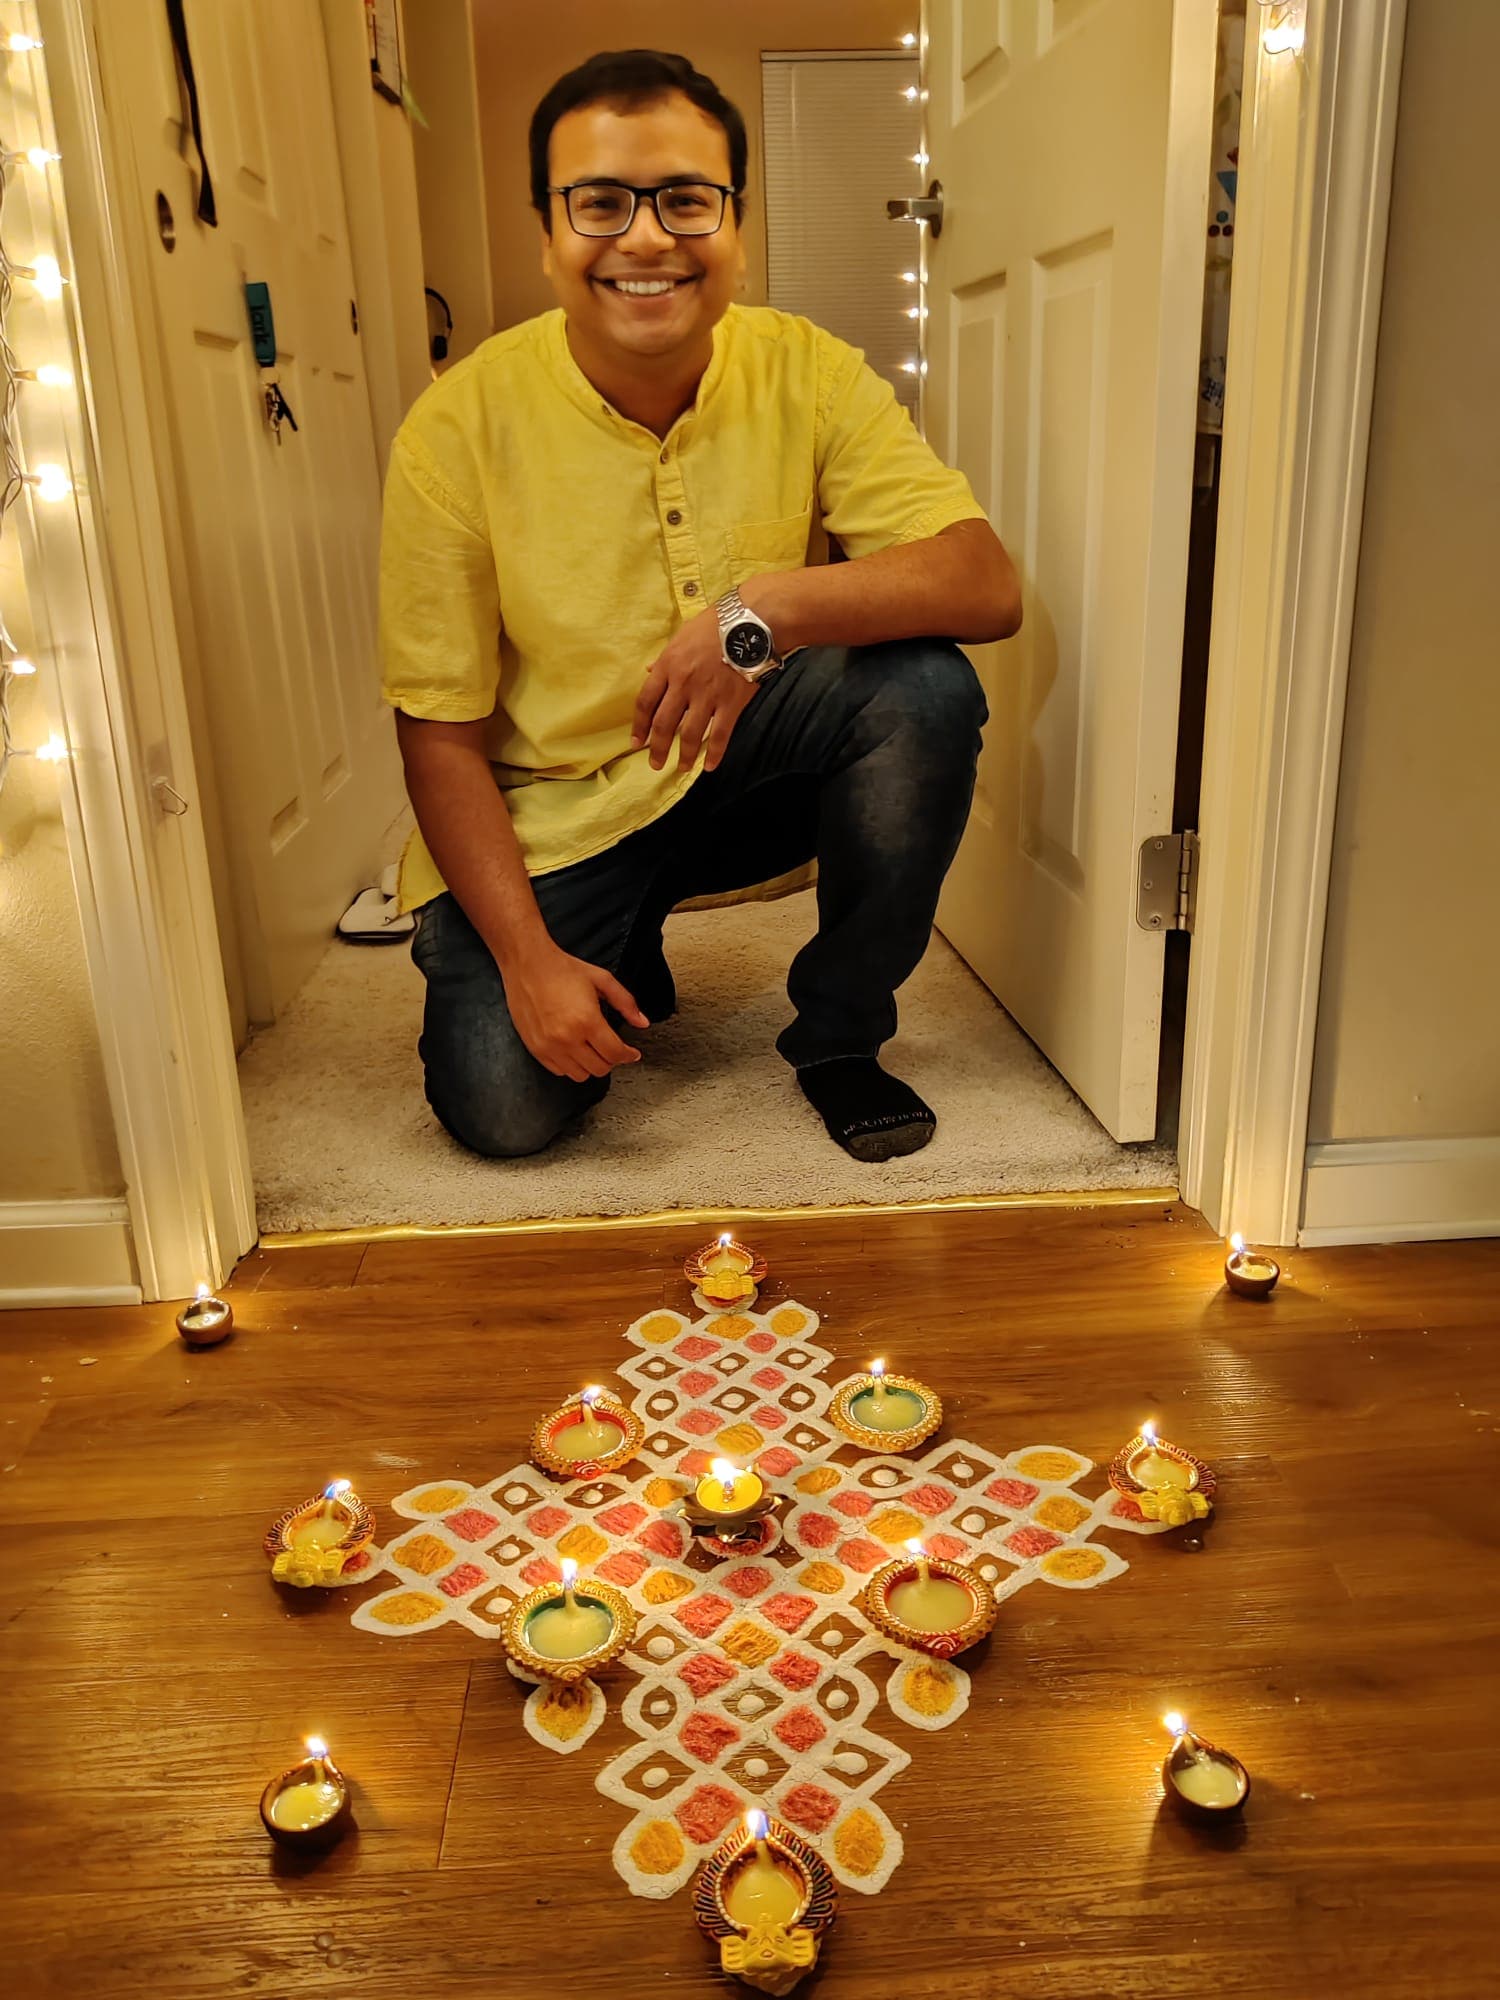 "Diwali serves as a bridge to share our culture with friends and the local community," said Dipesh Tamboli